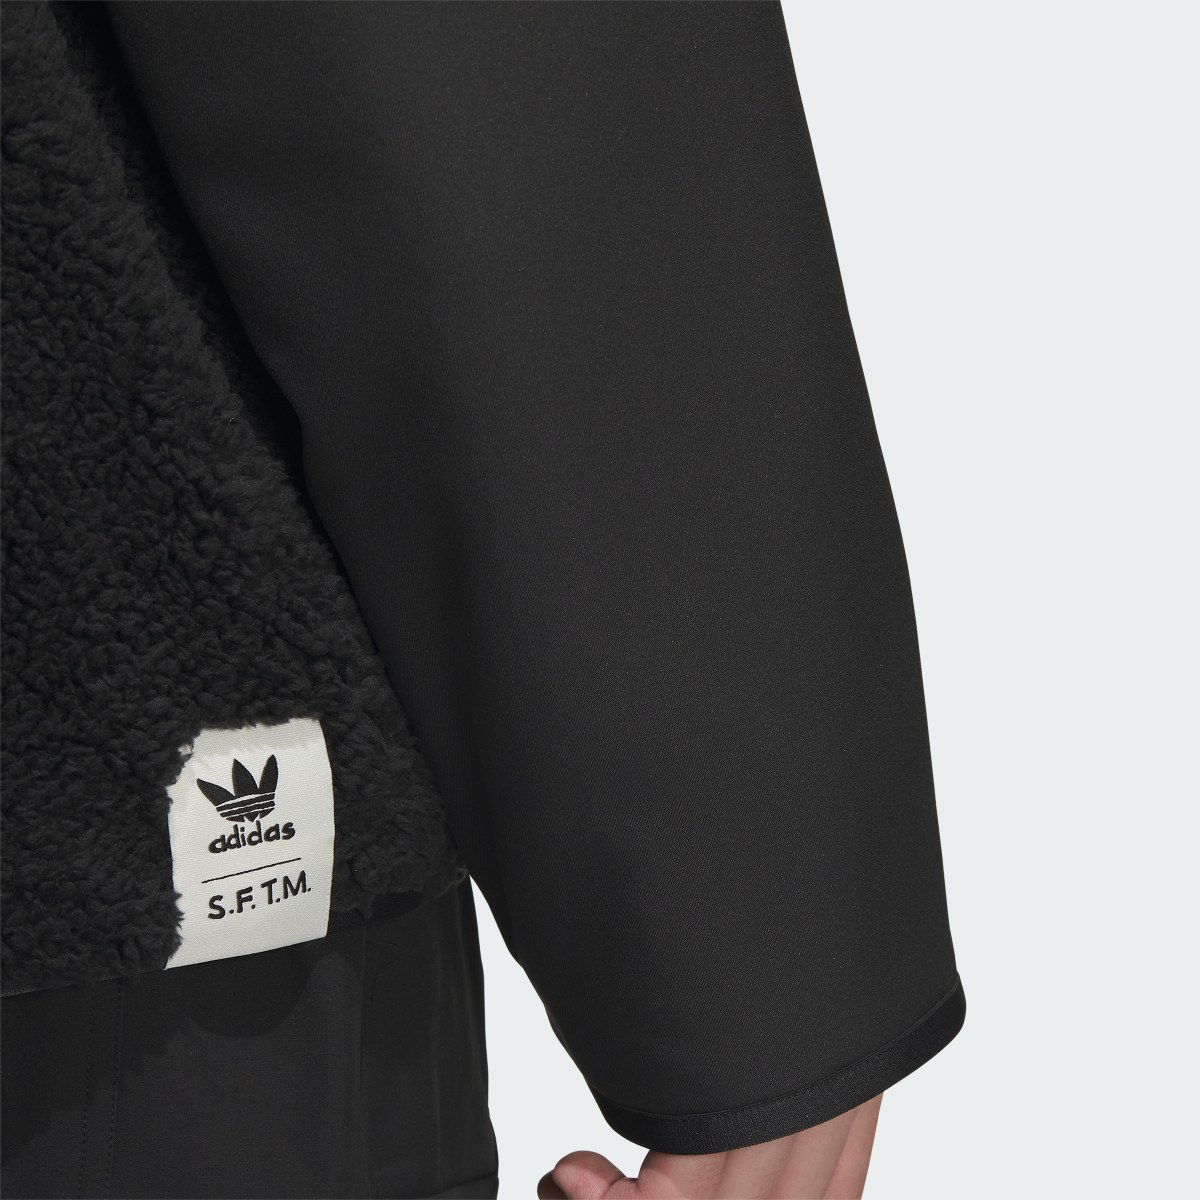 Adidas Song for the Mute Fleece Jacket (Gender Neutral). 6